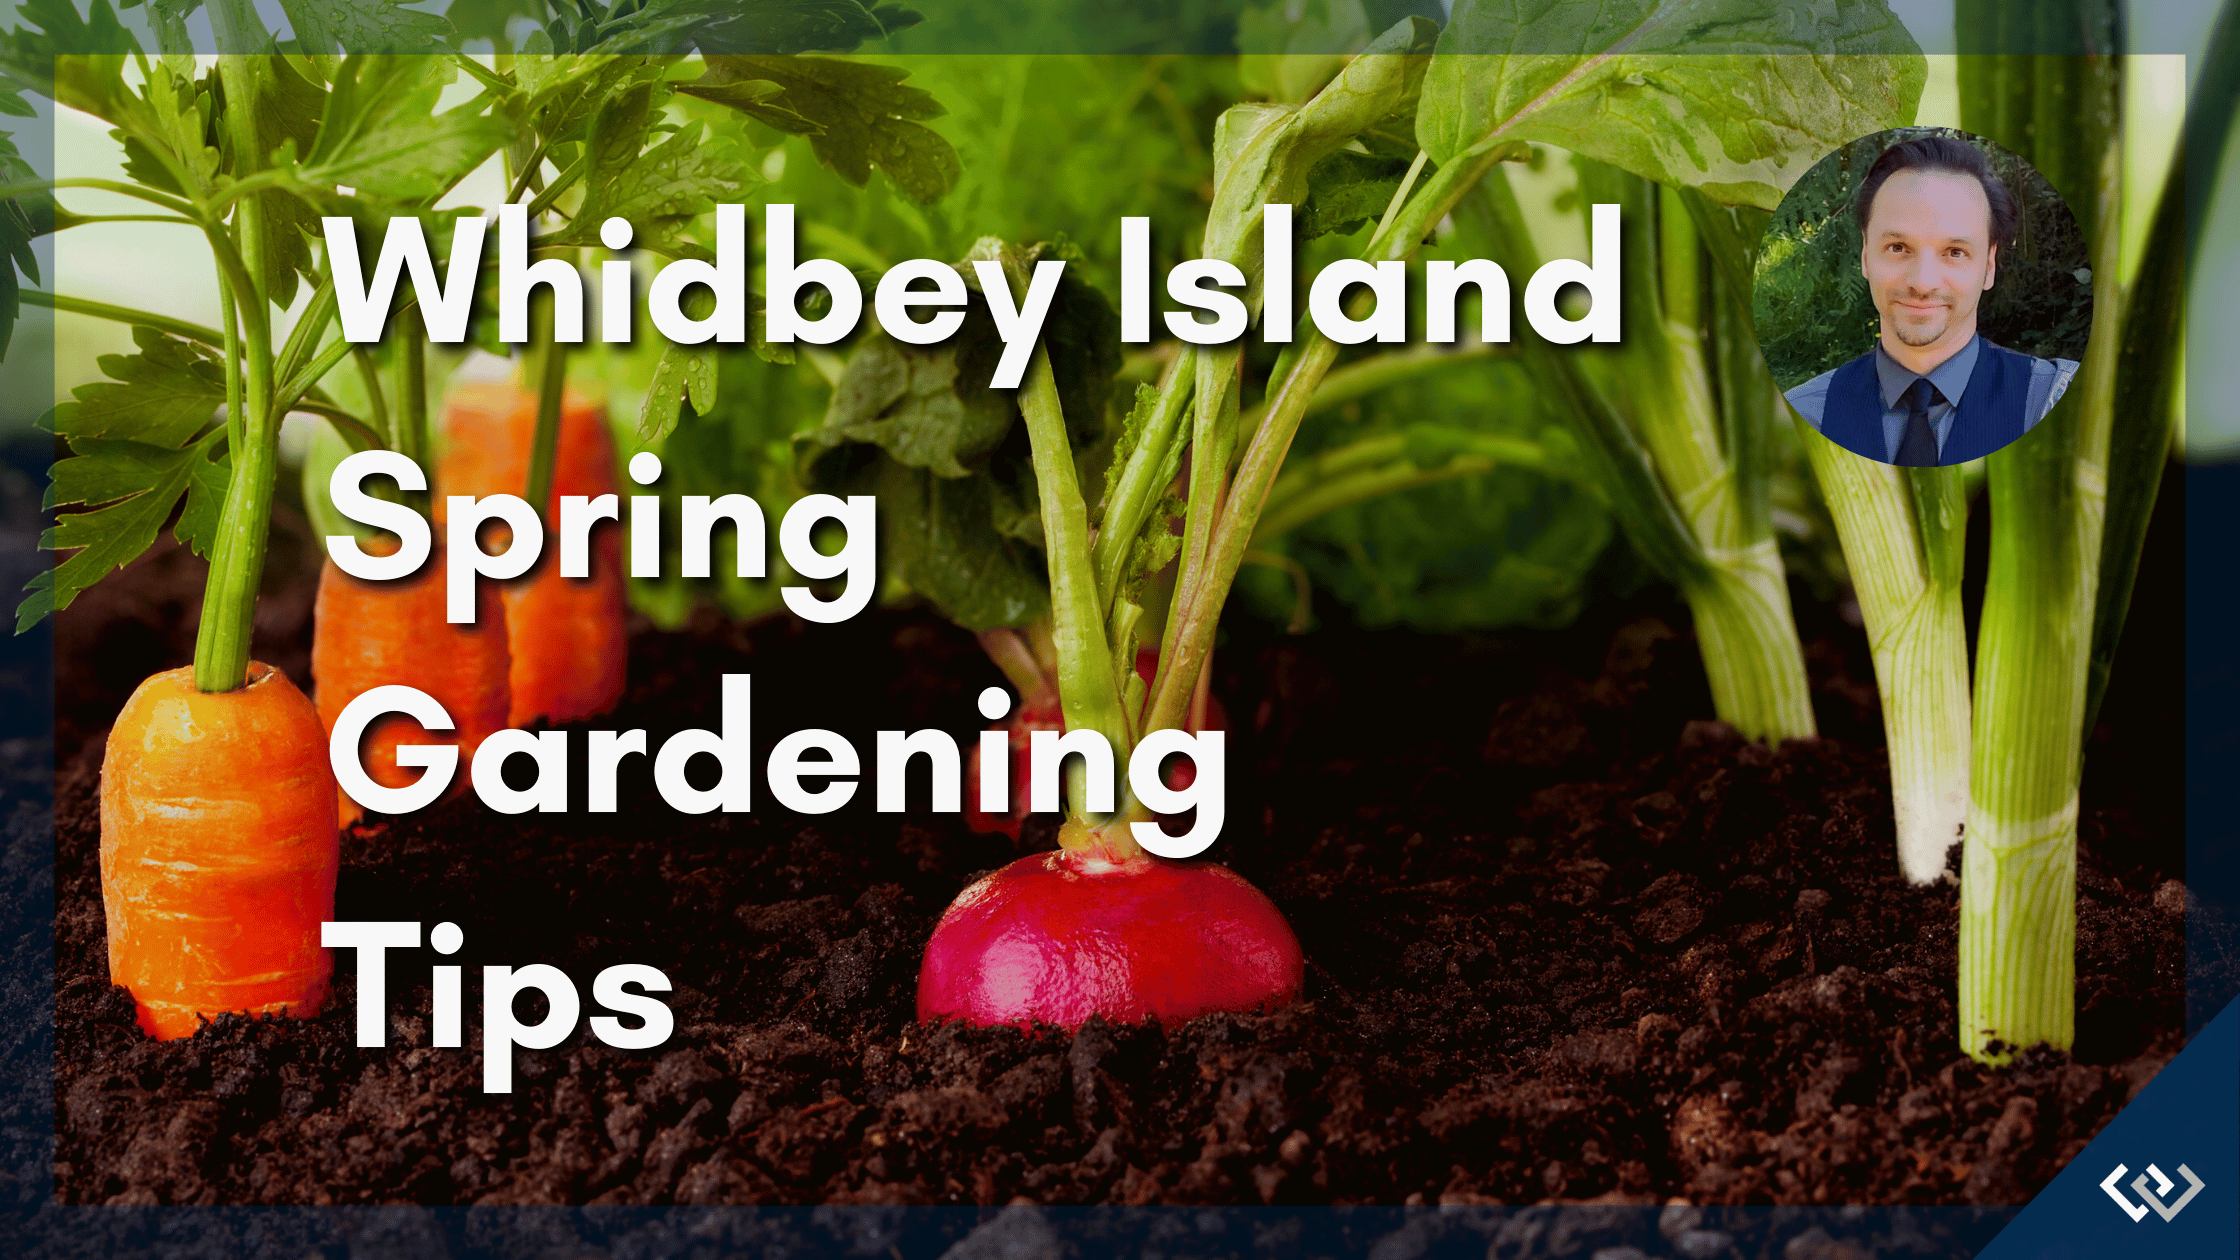 Whidbey Island Spring Gardening Tips